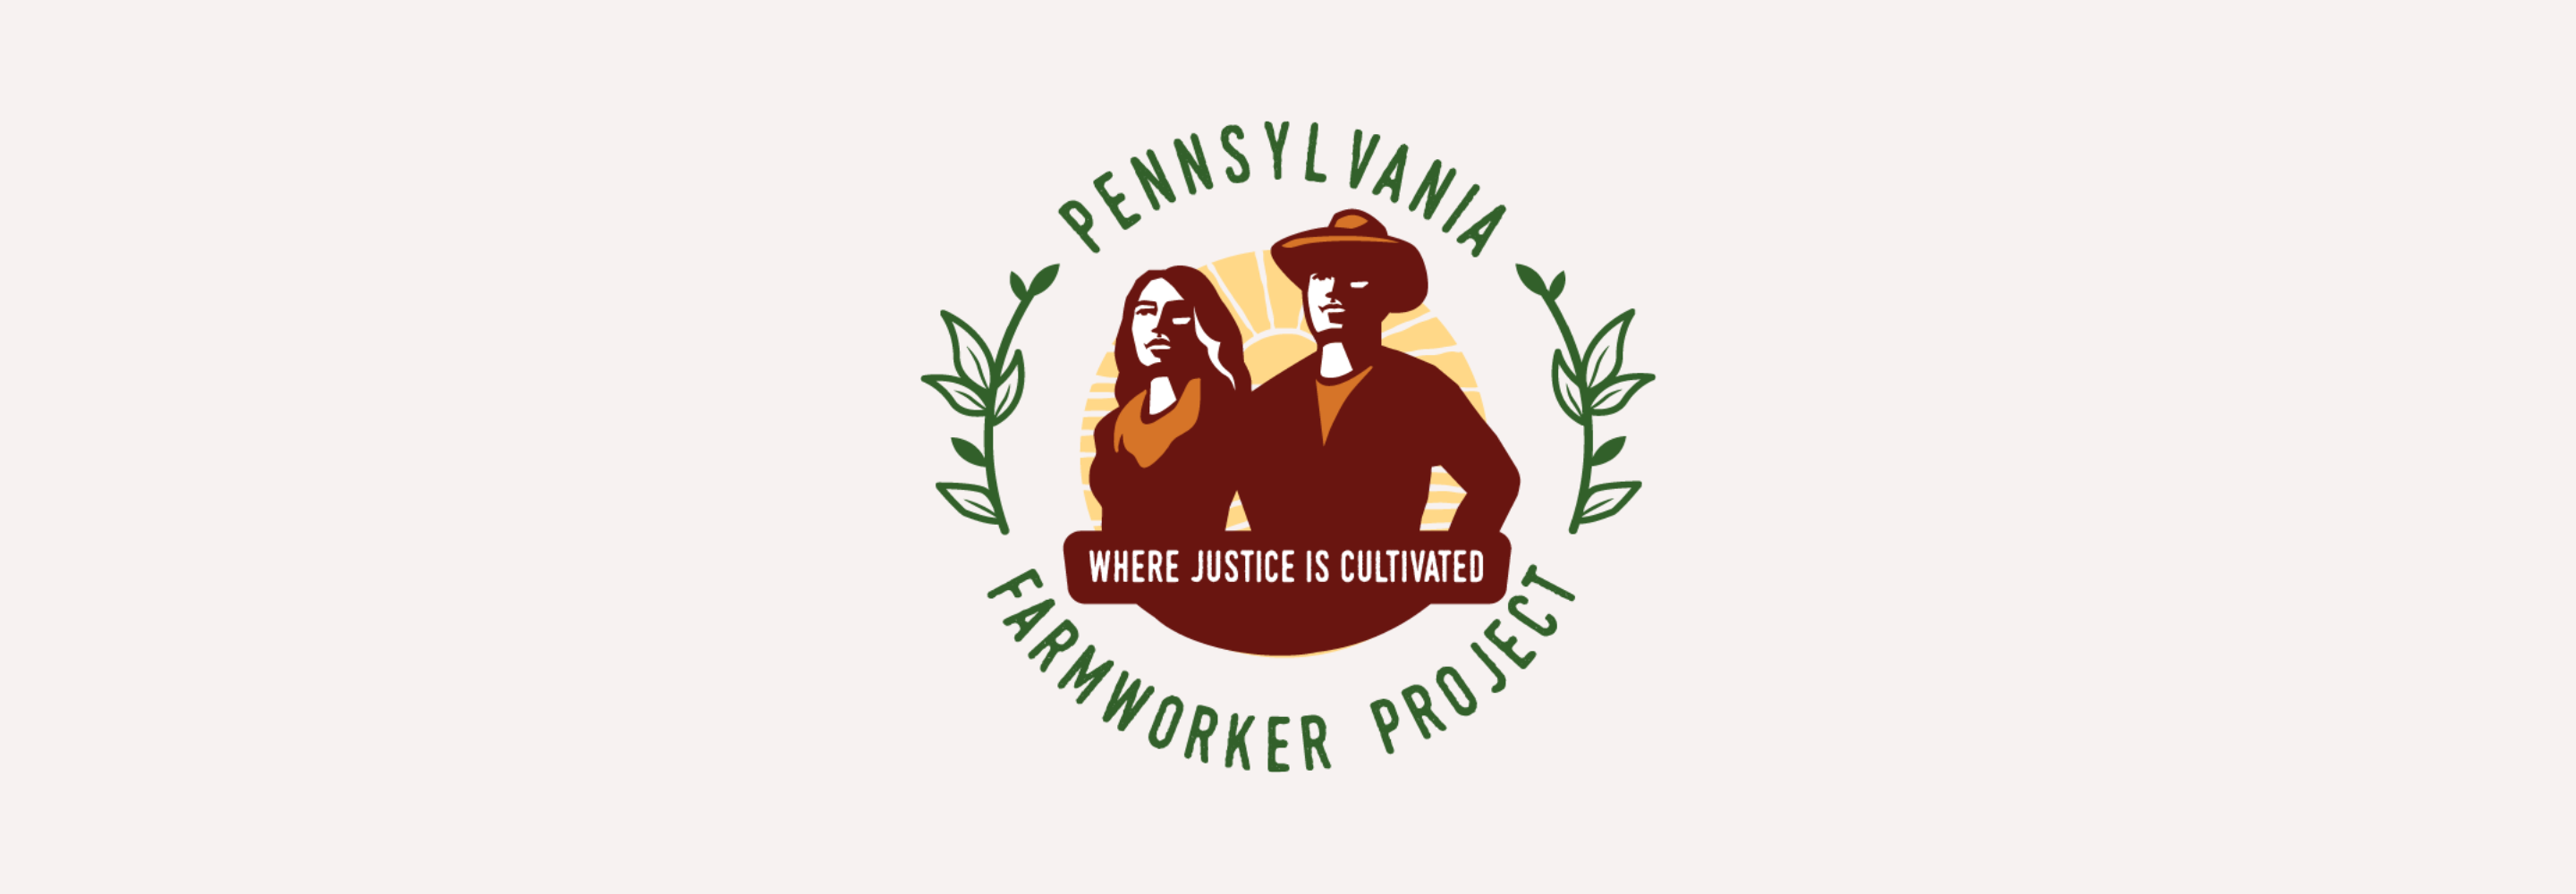 PFP logo: Two figures in red standing proudly. A banner reads "Where Justice is Cultivated" 